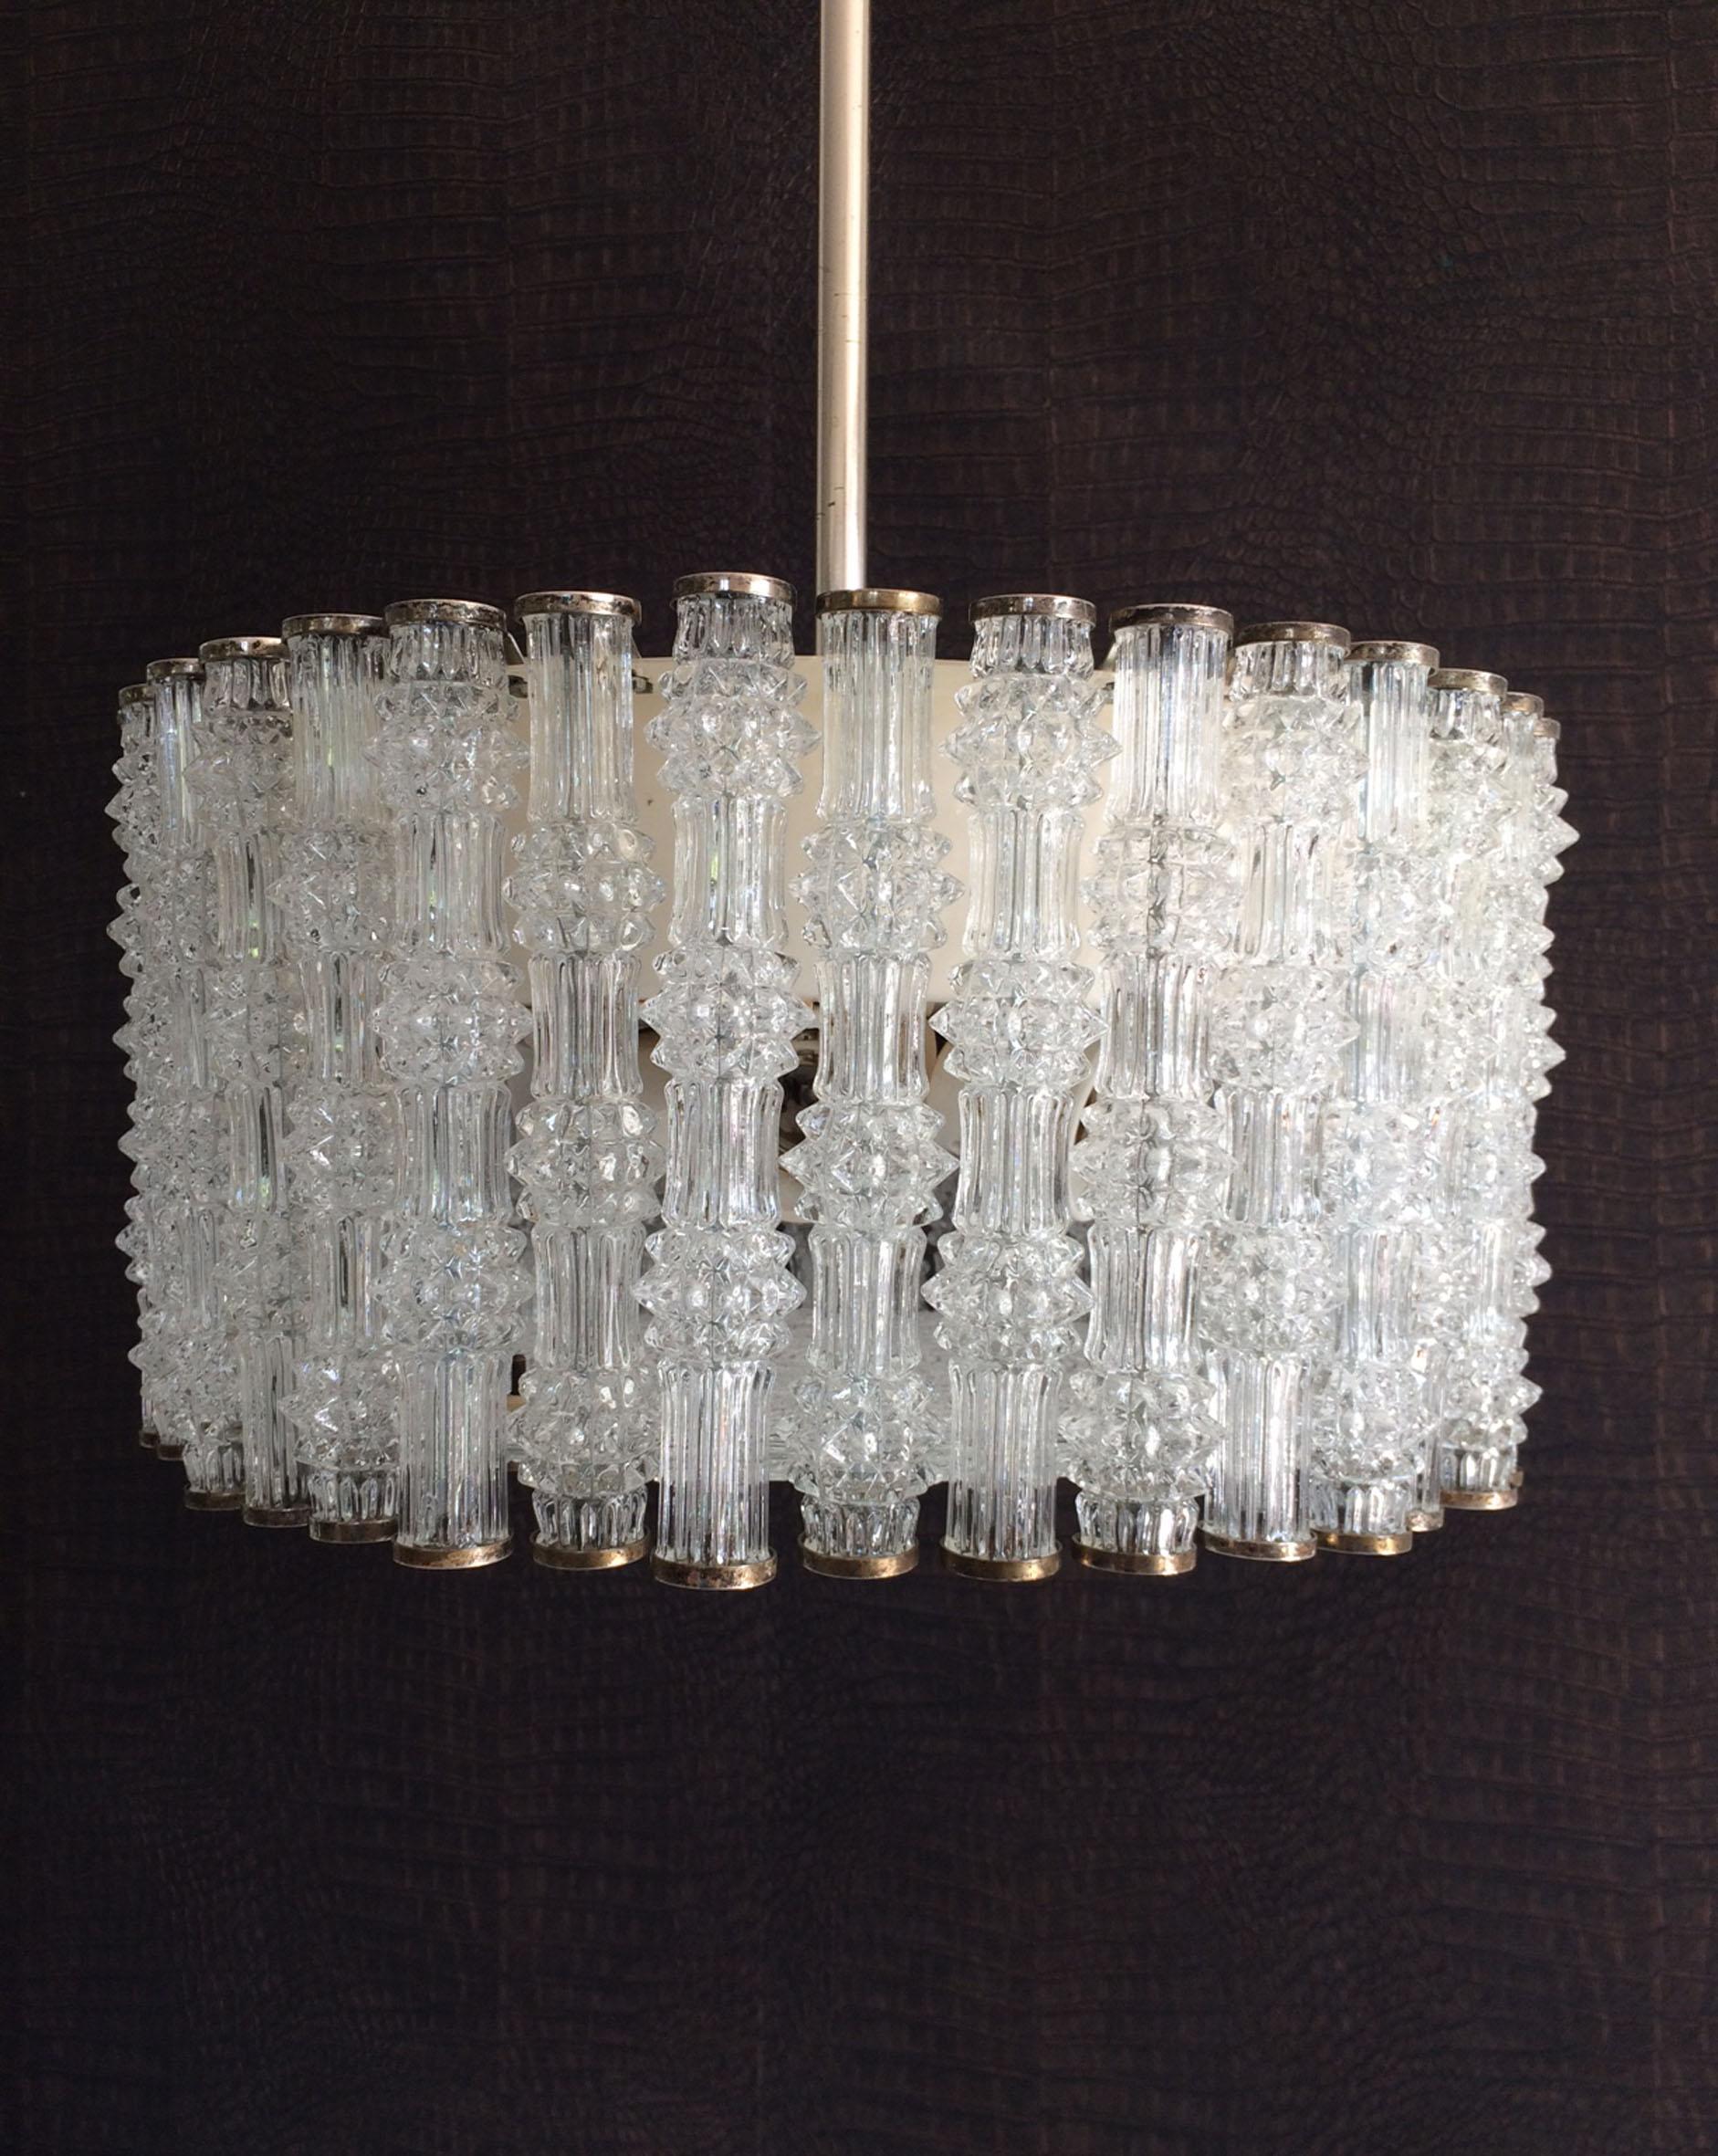 Midcentury german design glass pendat chandelier. A wonderfull 1950's original Kaiser Leuchten Design Primat Ice Texture Crystal Glass Drum Tube Chandelier ceiling lamp light. Made in Germany in the mid 1950's. In very good, all original condition.